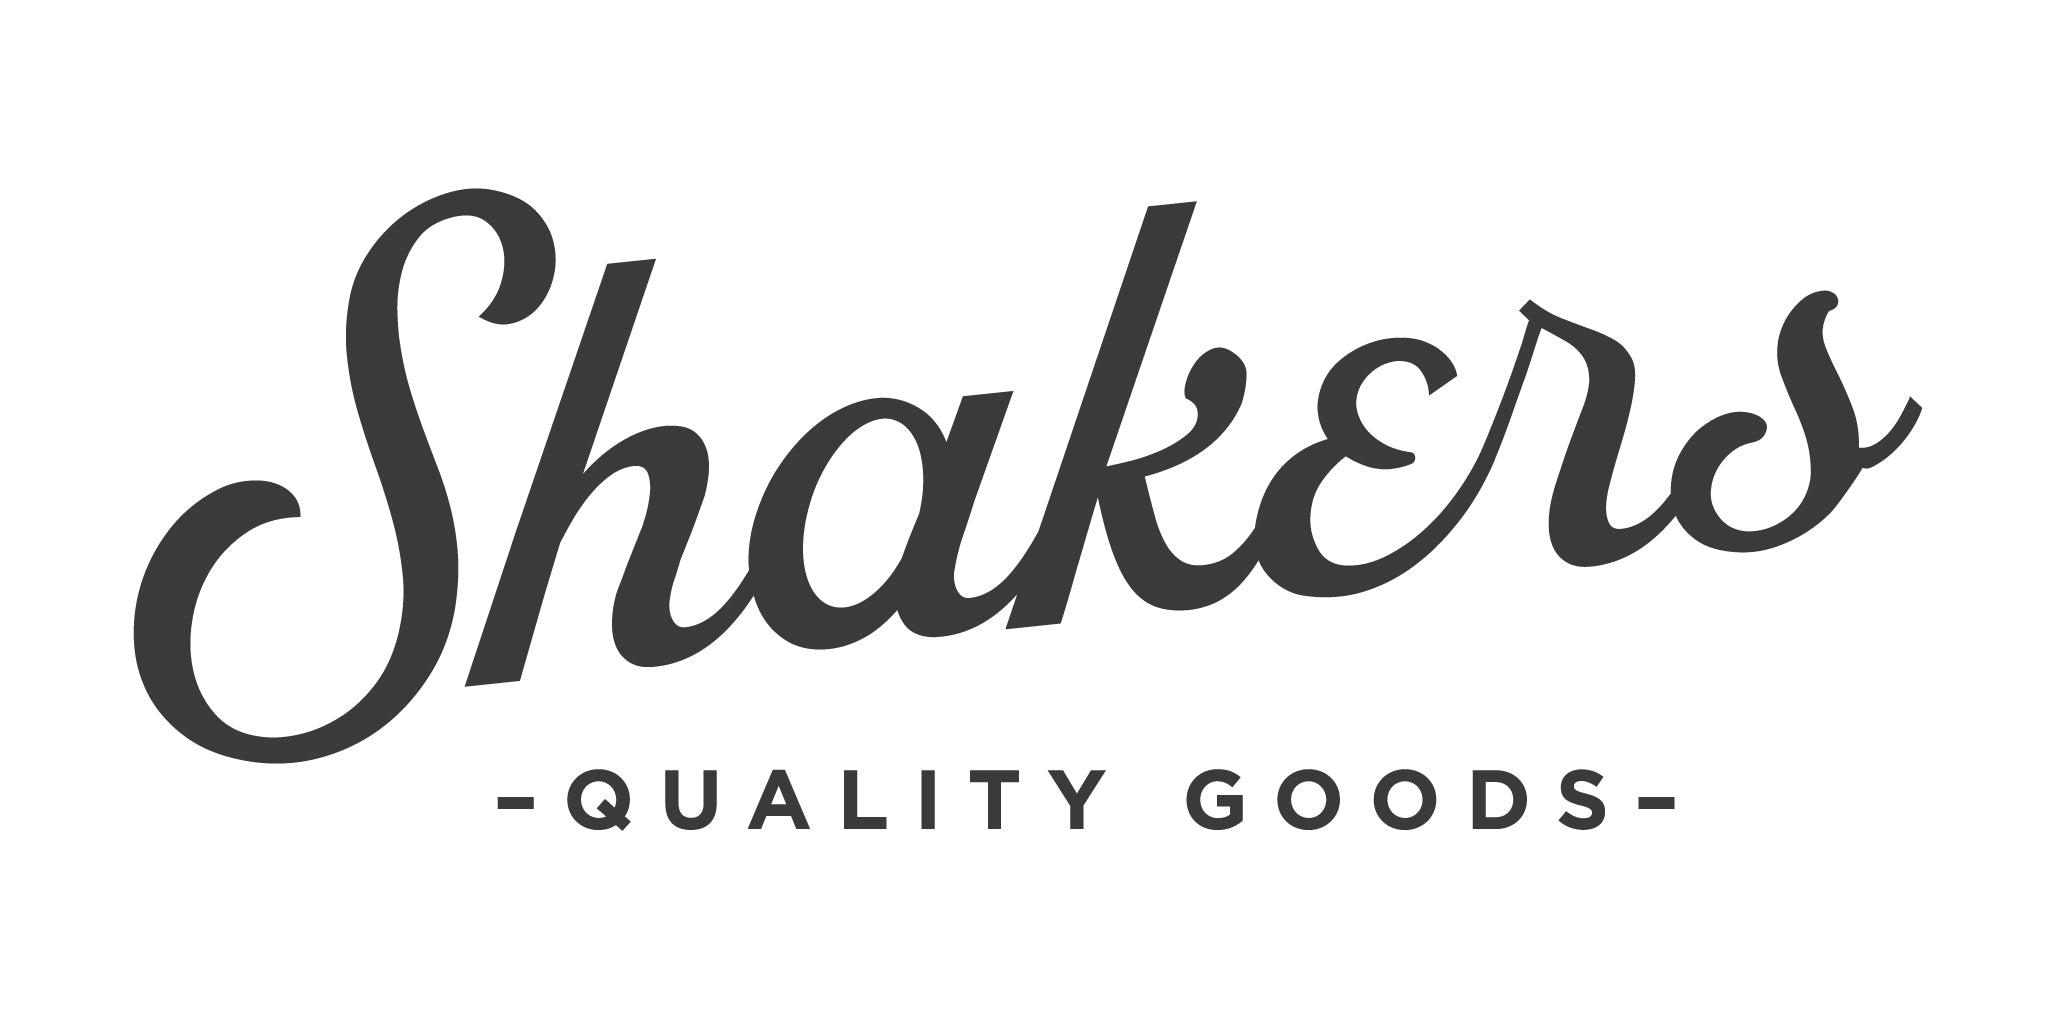 Shakers Quality Goods